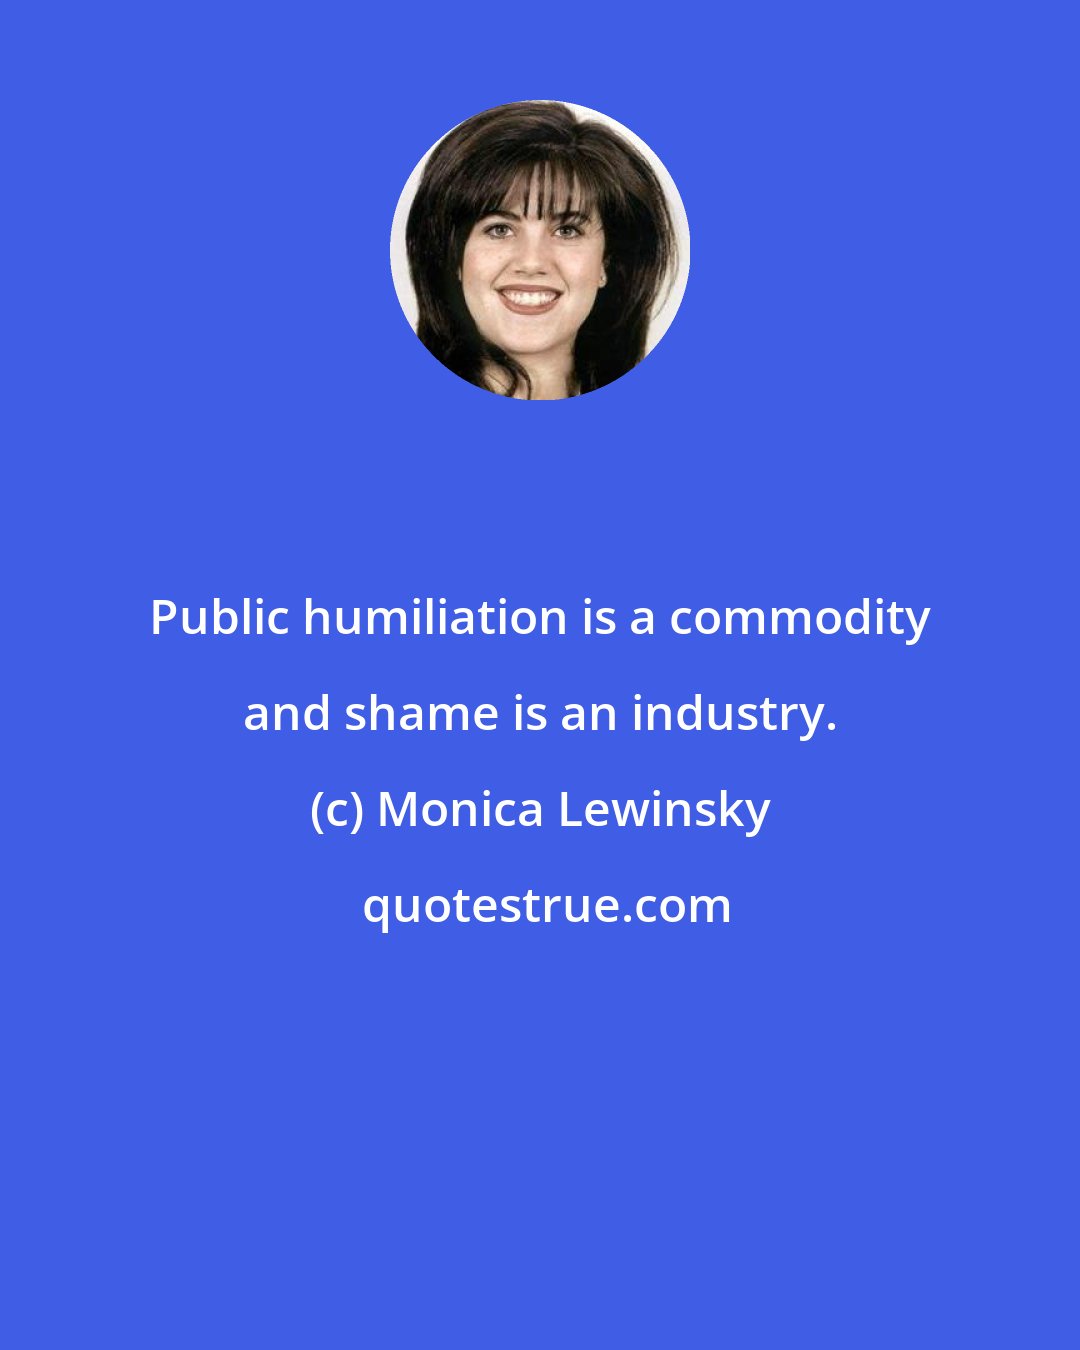 Monica Lewinsky: Public humiliation is a commodity and shame is an industry.